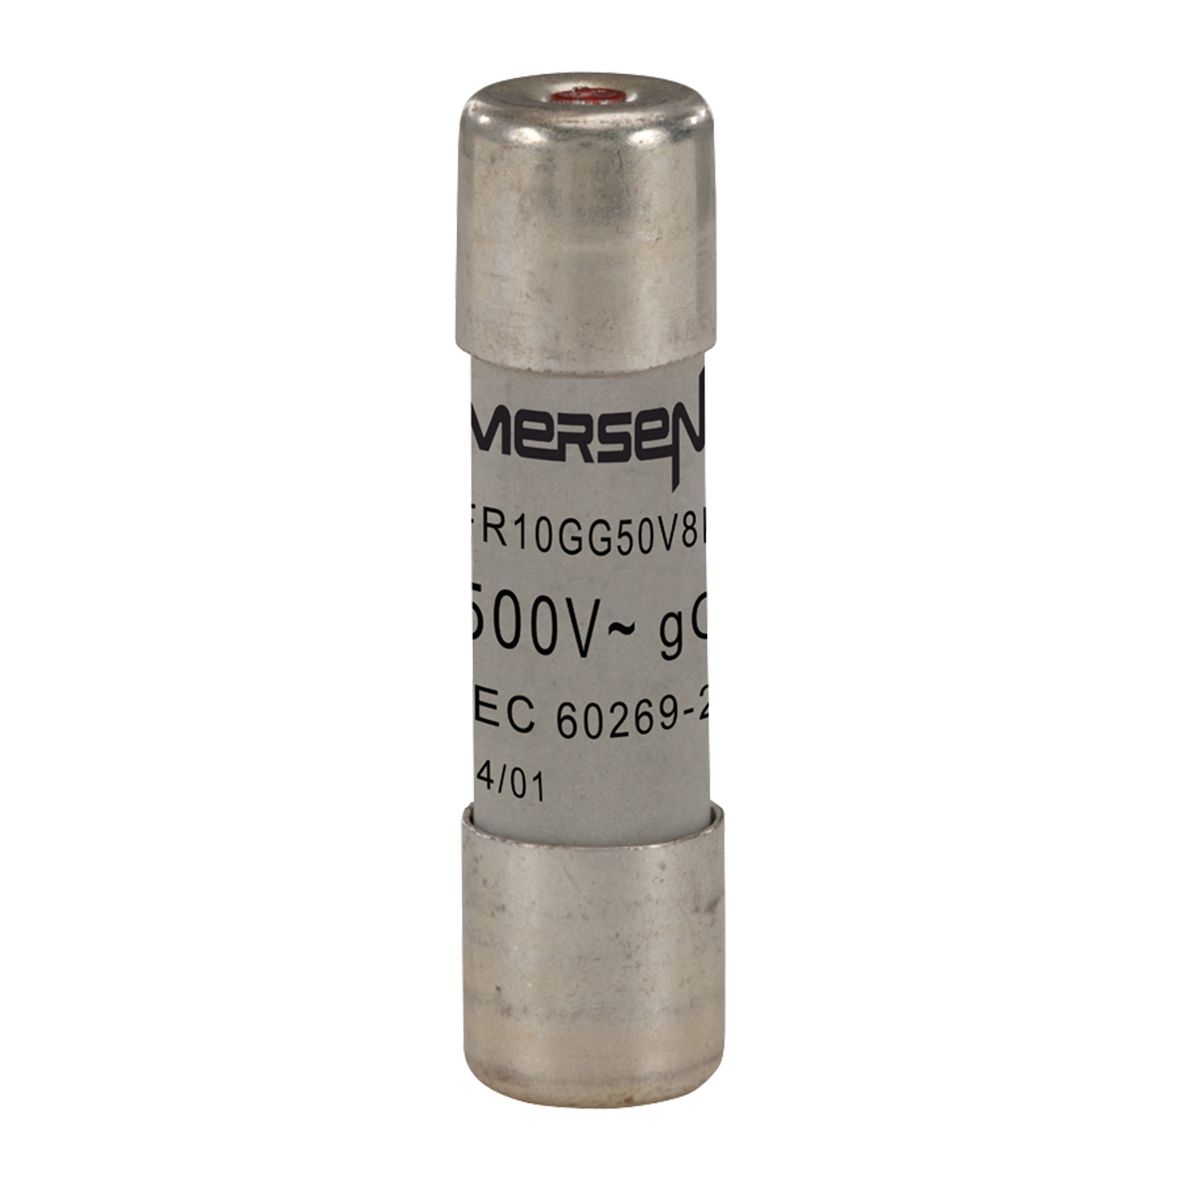 V219231 - Cylindrical fuse-link gG 500VAC 10.3x38, 8A with indicator